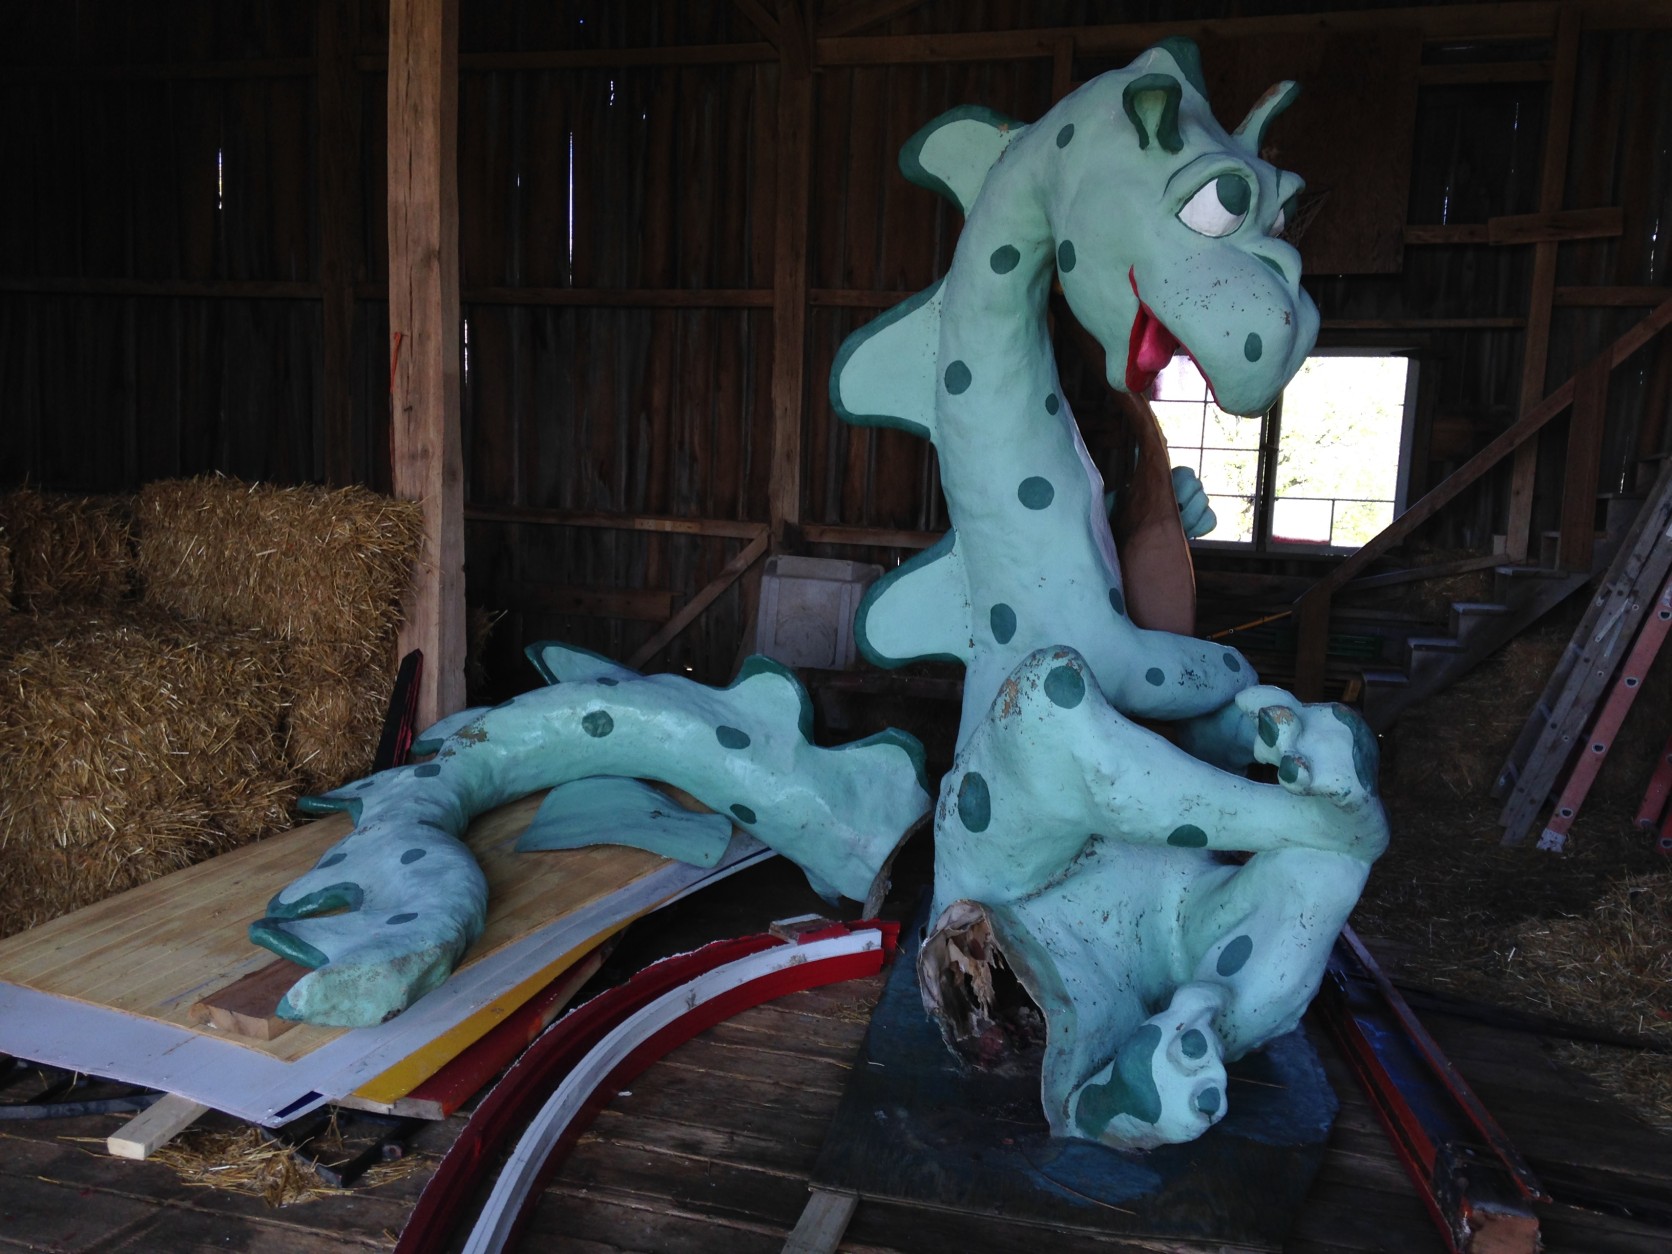 The friendly-looking dragon from the theme park's entrance was recently moved to a barn at nearby Clark's Elioak Farm. The dragon will be repaired and repainted for future display. (WTOP/Michelle Basch)